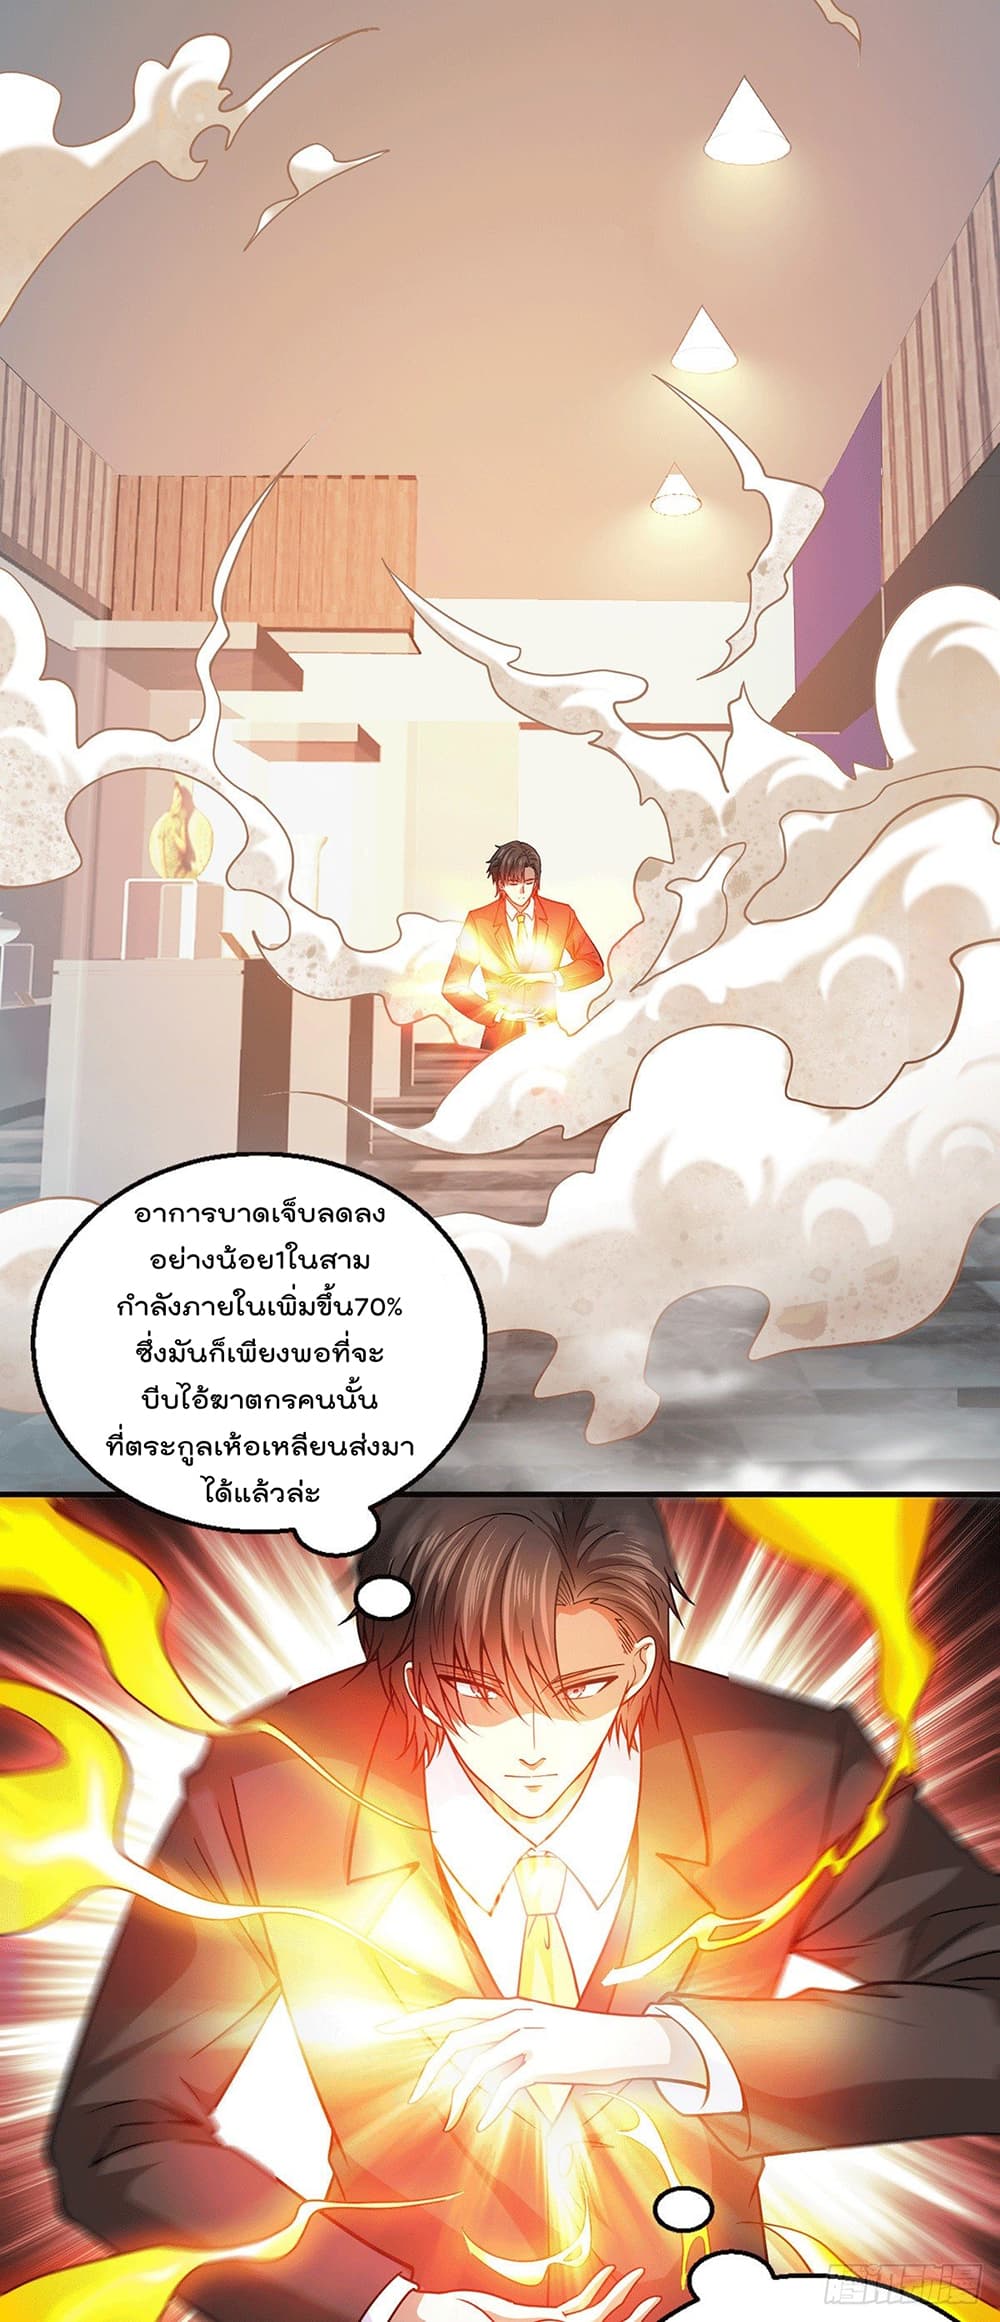 God Dragon of War in The City 52 (11)